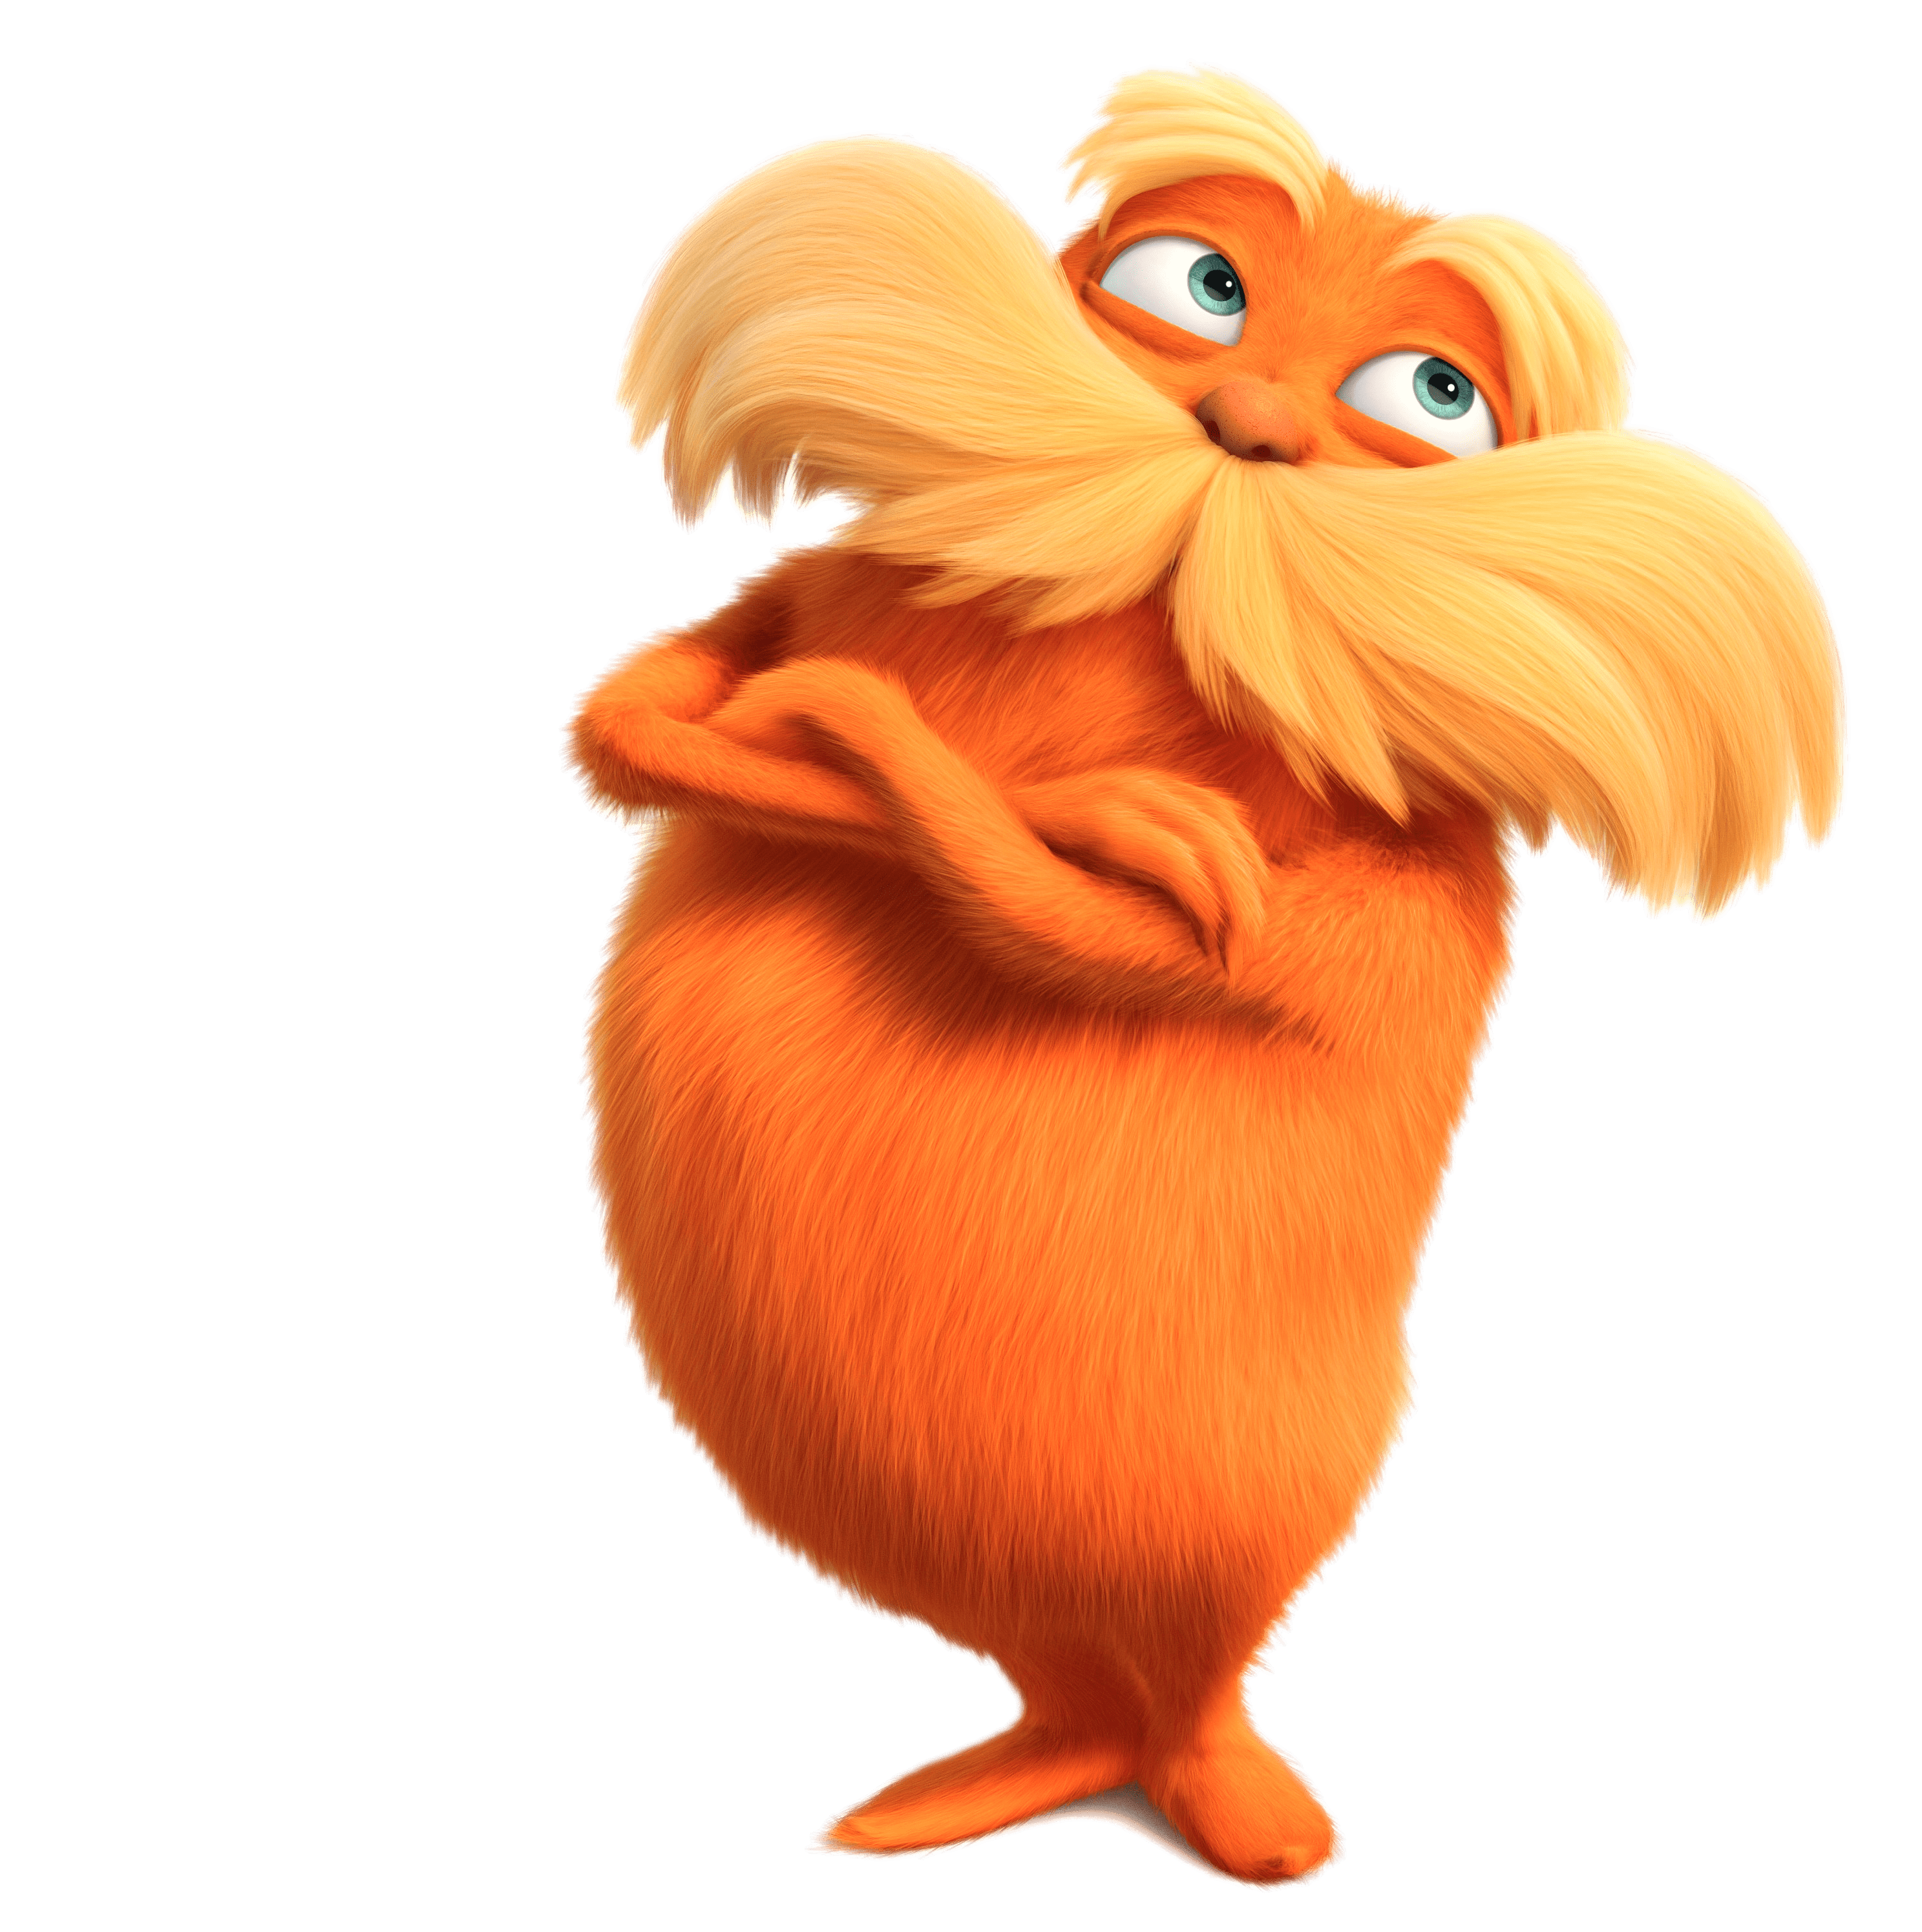 The lorax thinking transparent. Eyebrow clipart animated